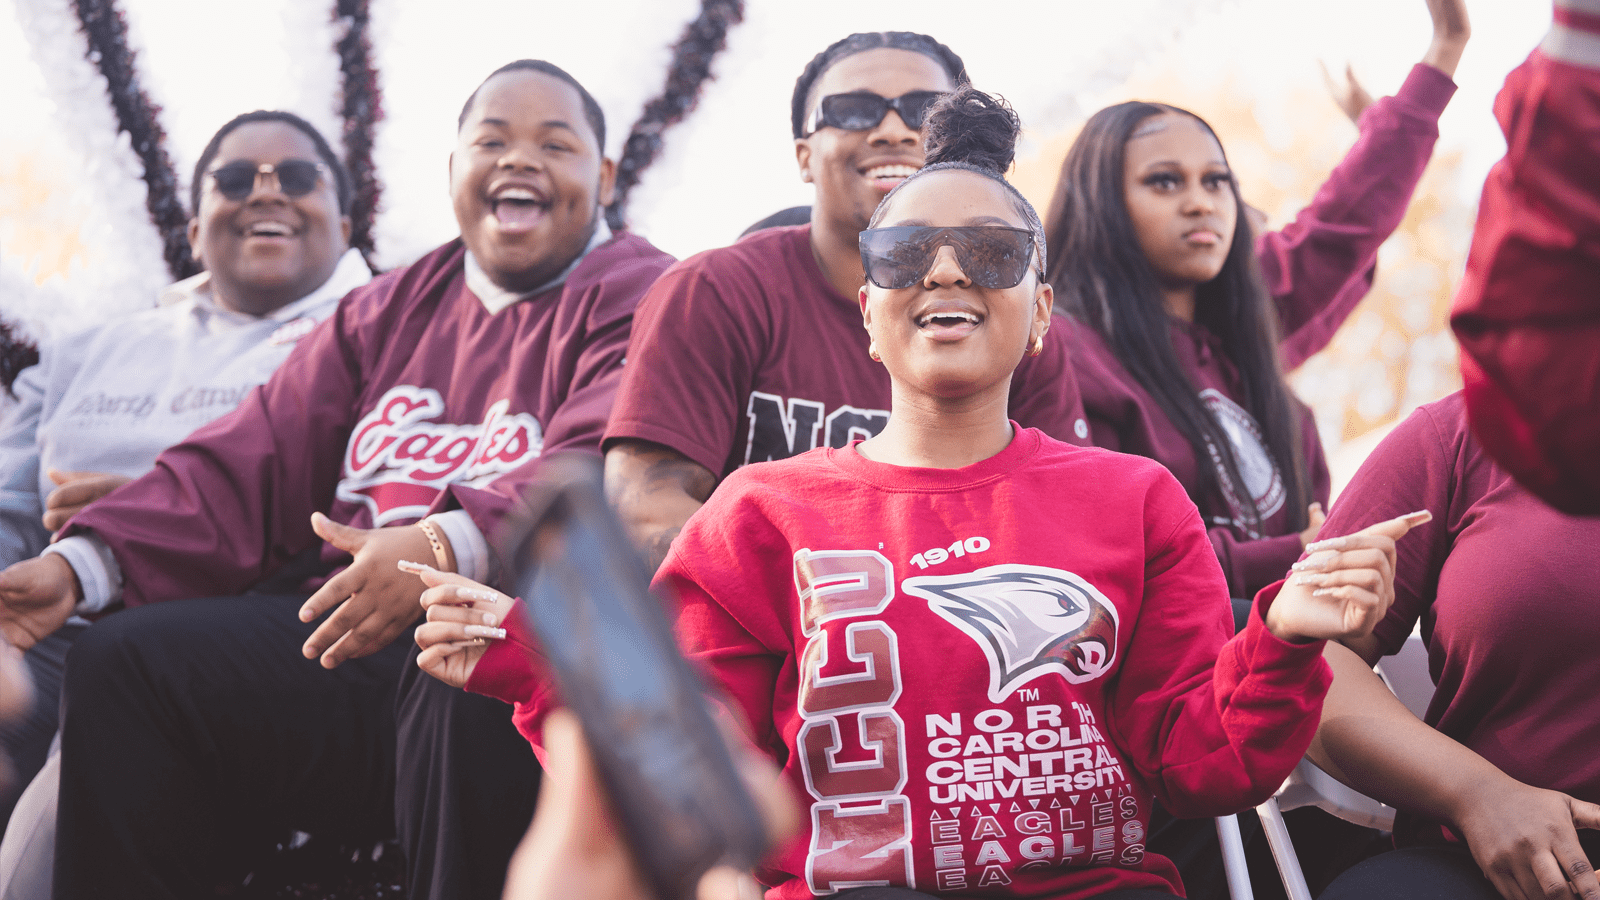 NCCU students celebrating on Homecoming game day